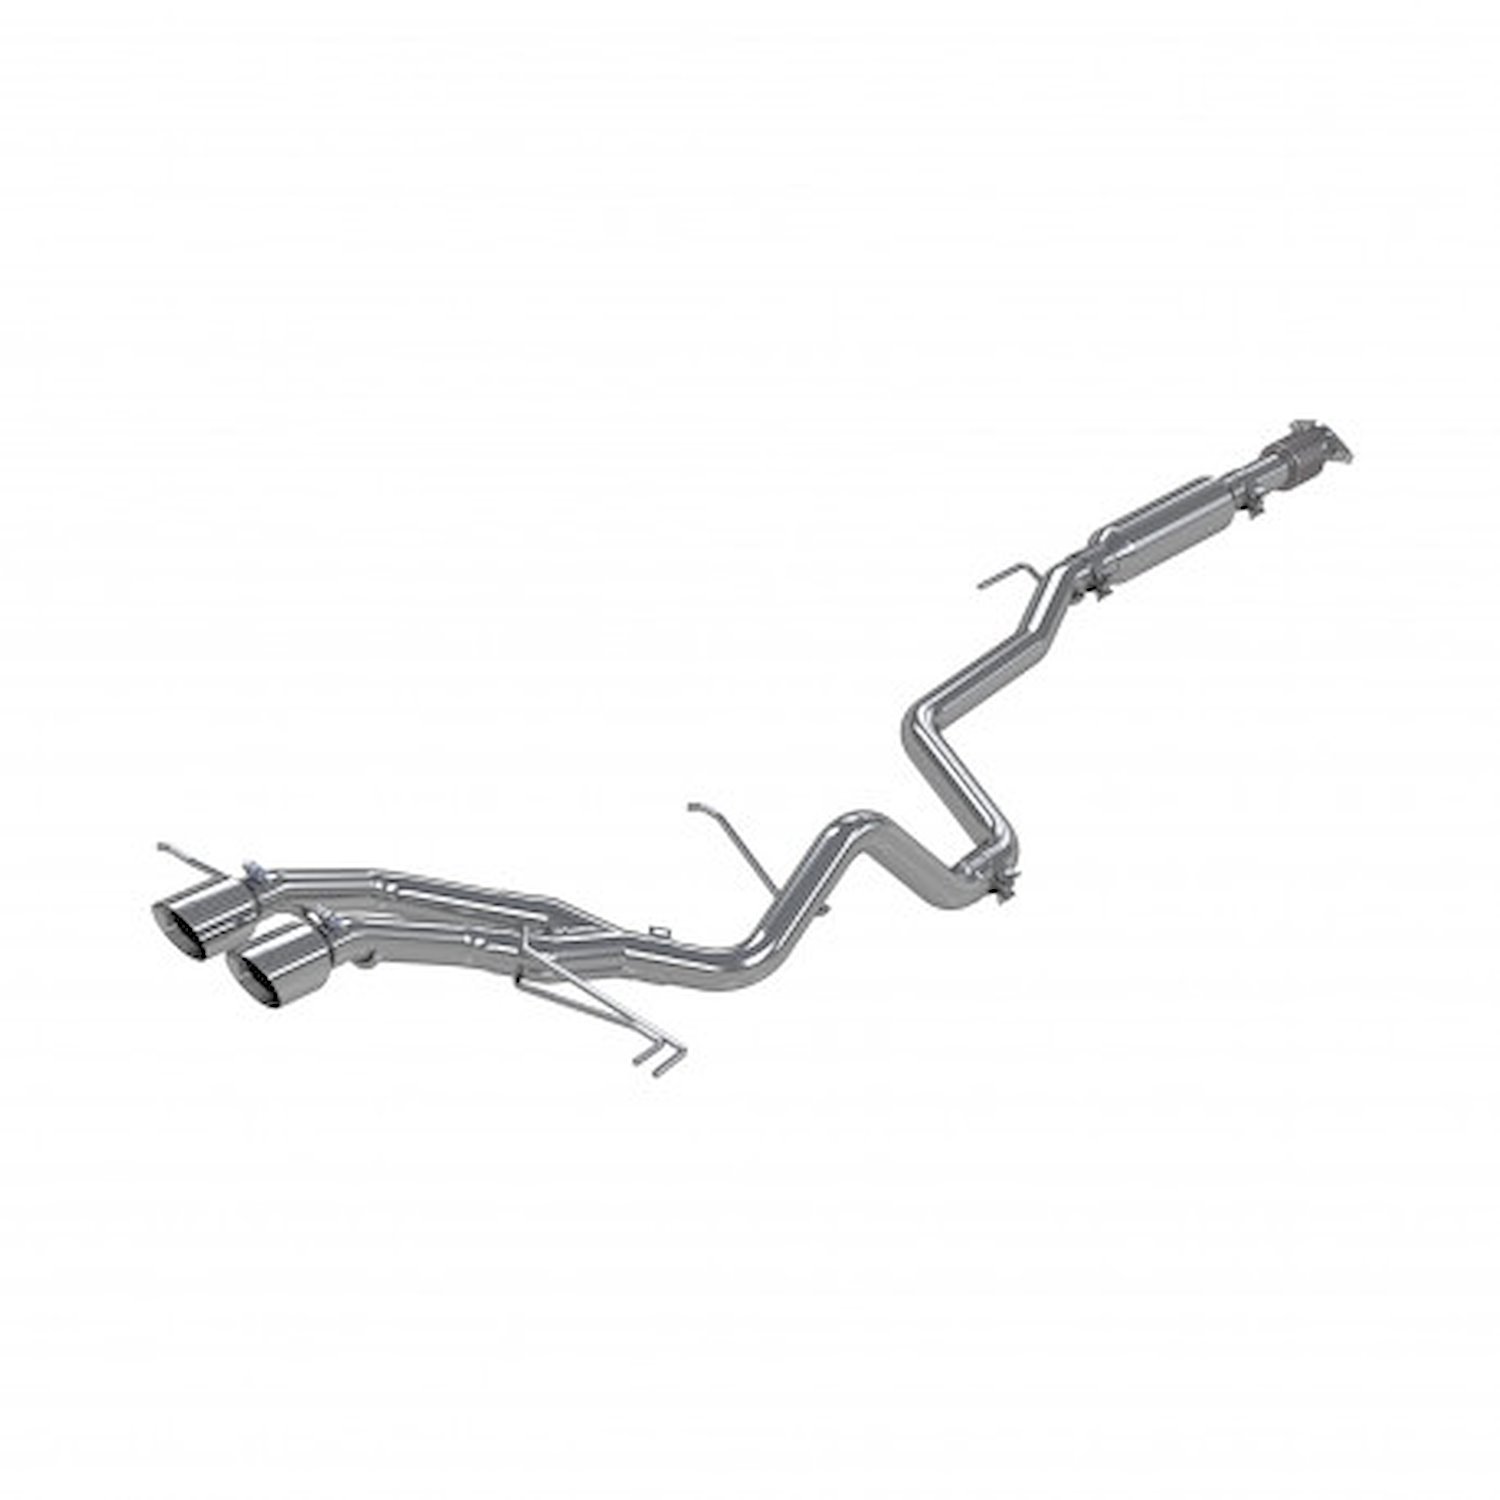 Installer Series Exhaust System for 2013-2018 Fits Hyundai